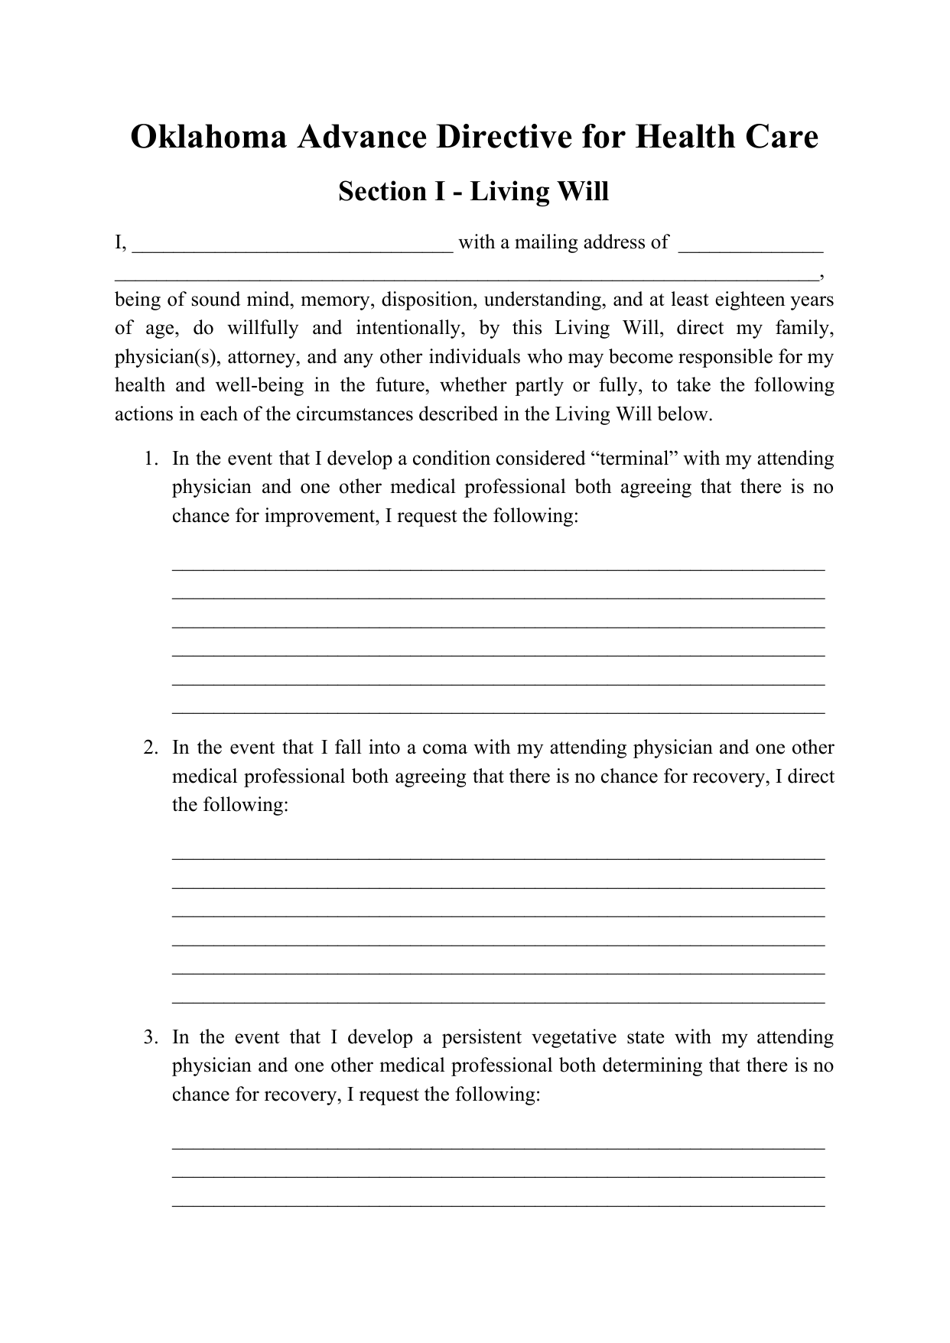 Advance Directive for Health Care Form - Oklahoma, Page 1